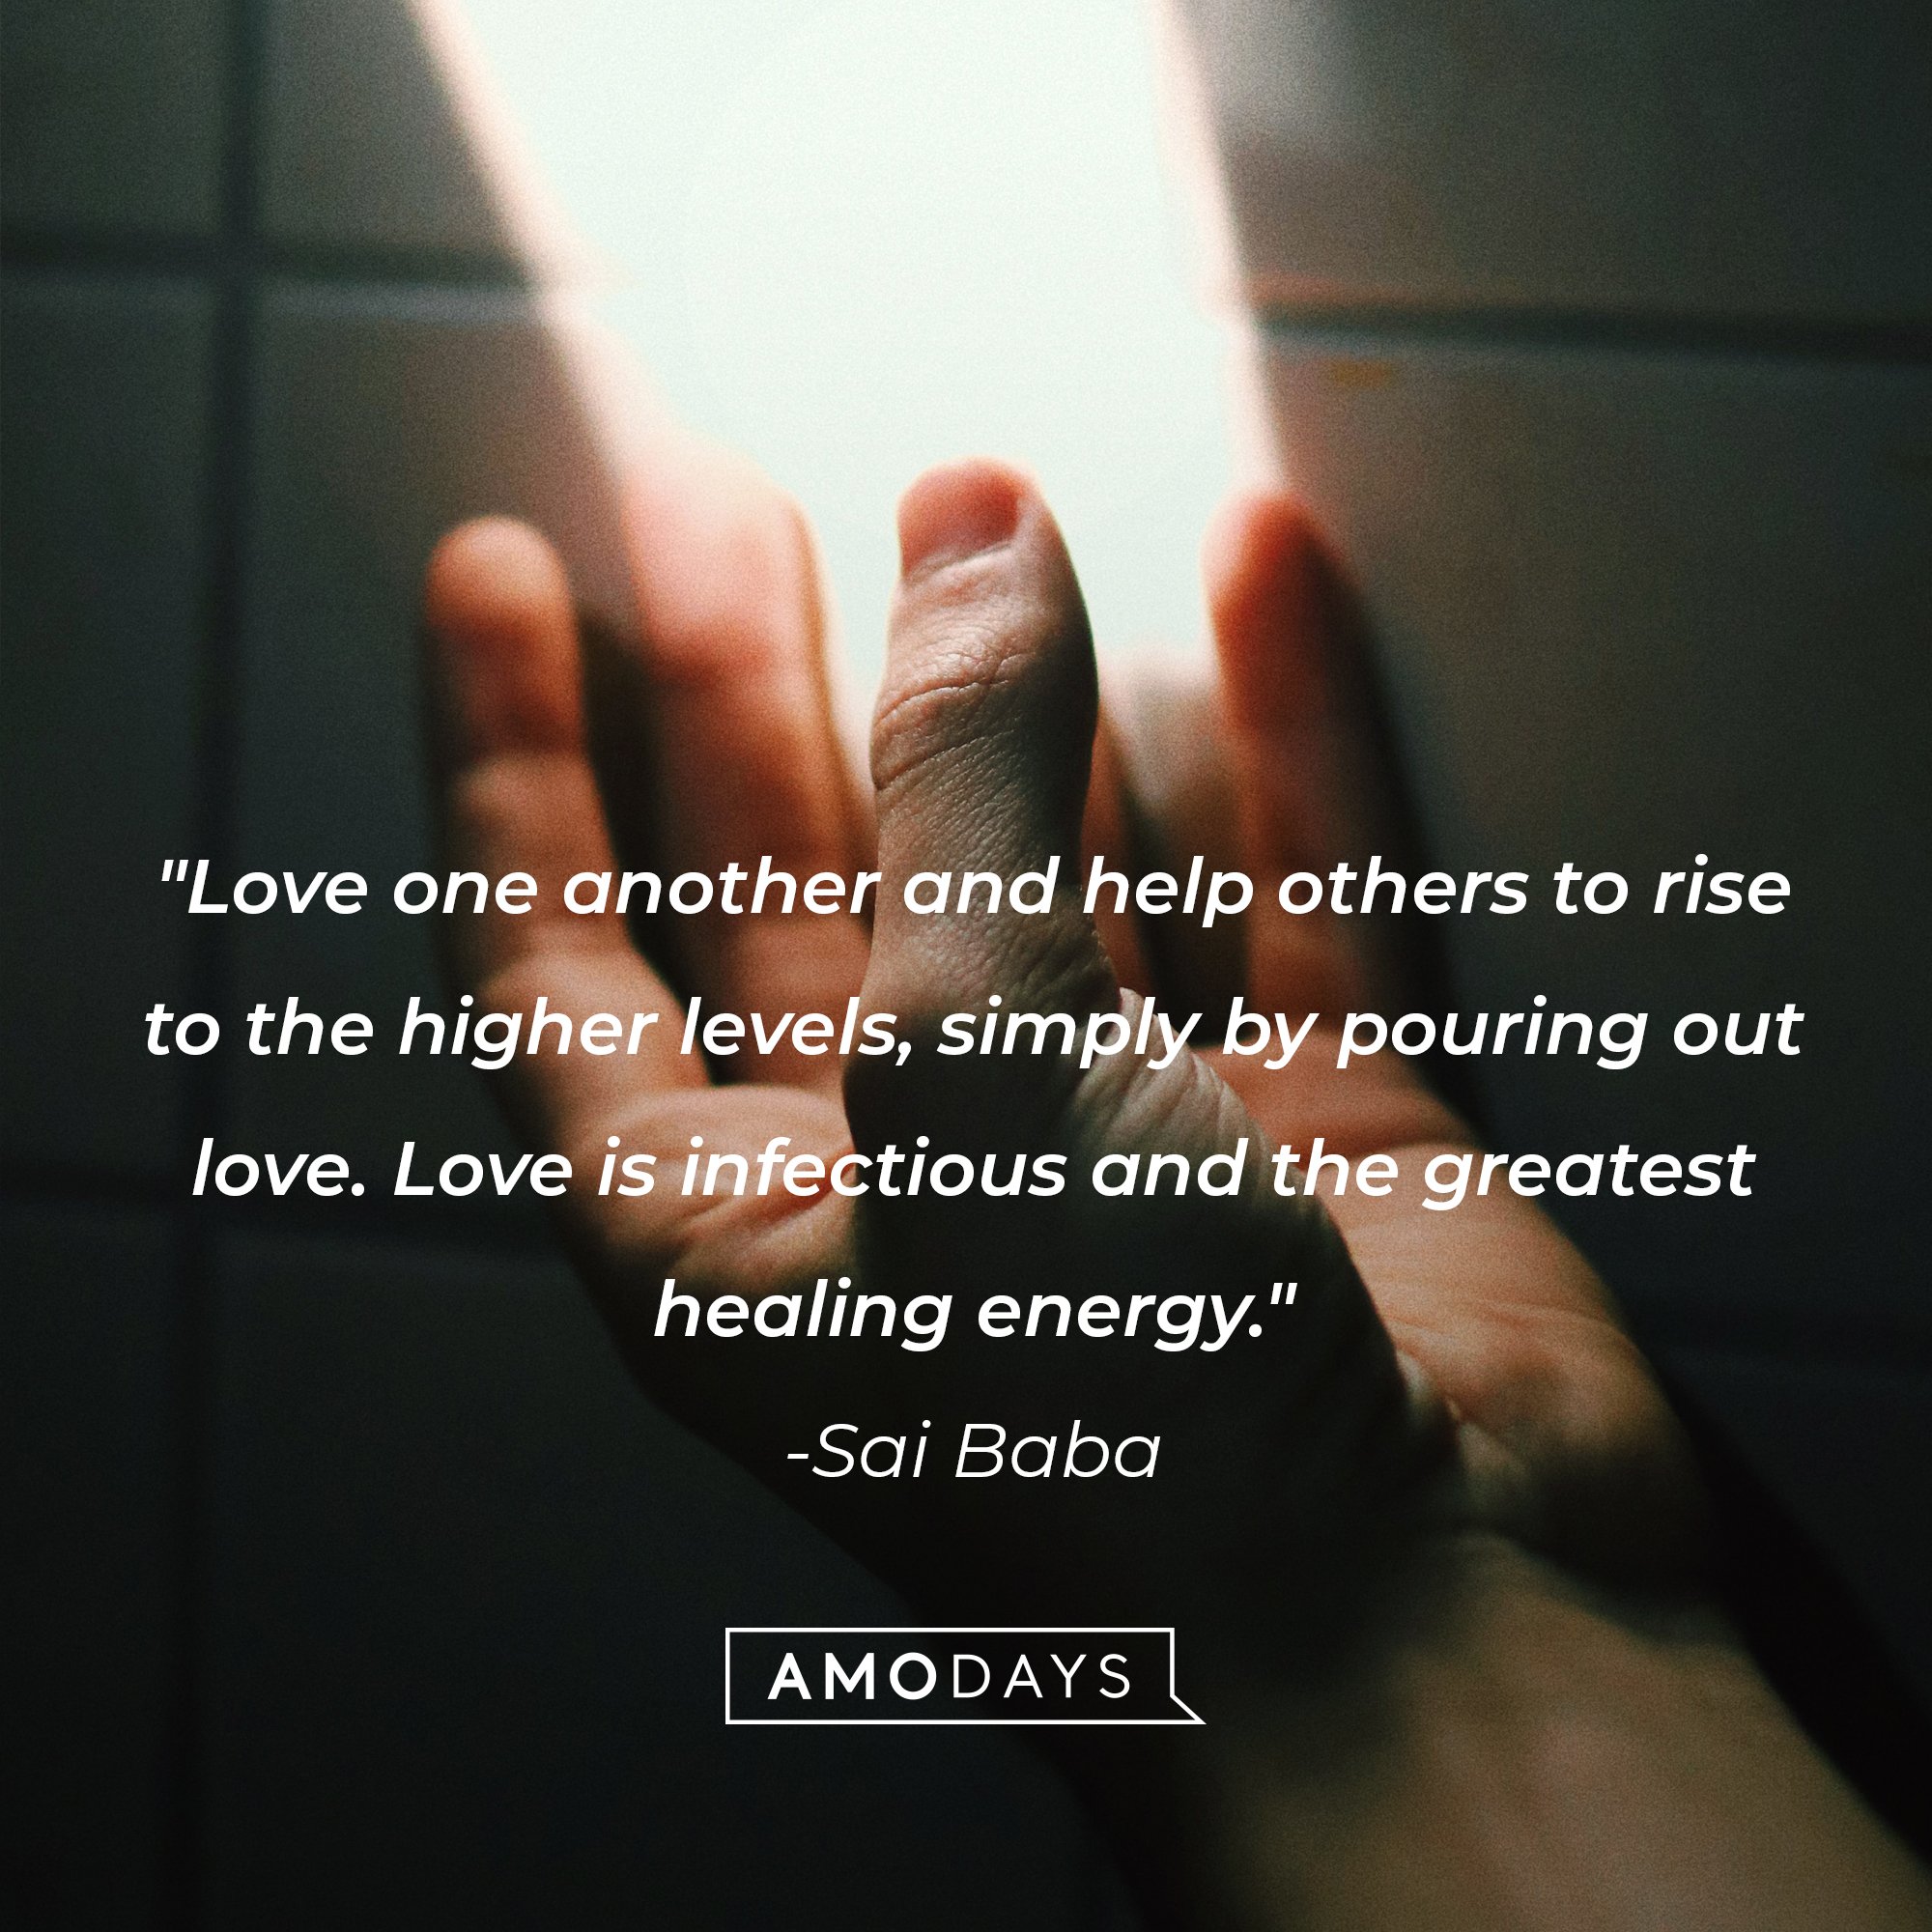 Sai Baba’s quote: "Love one another and help others to rise to the higher levels, simply by pouring out love. Love is infectious and the greatest healing energy." | Image: AmoDays